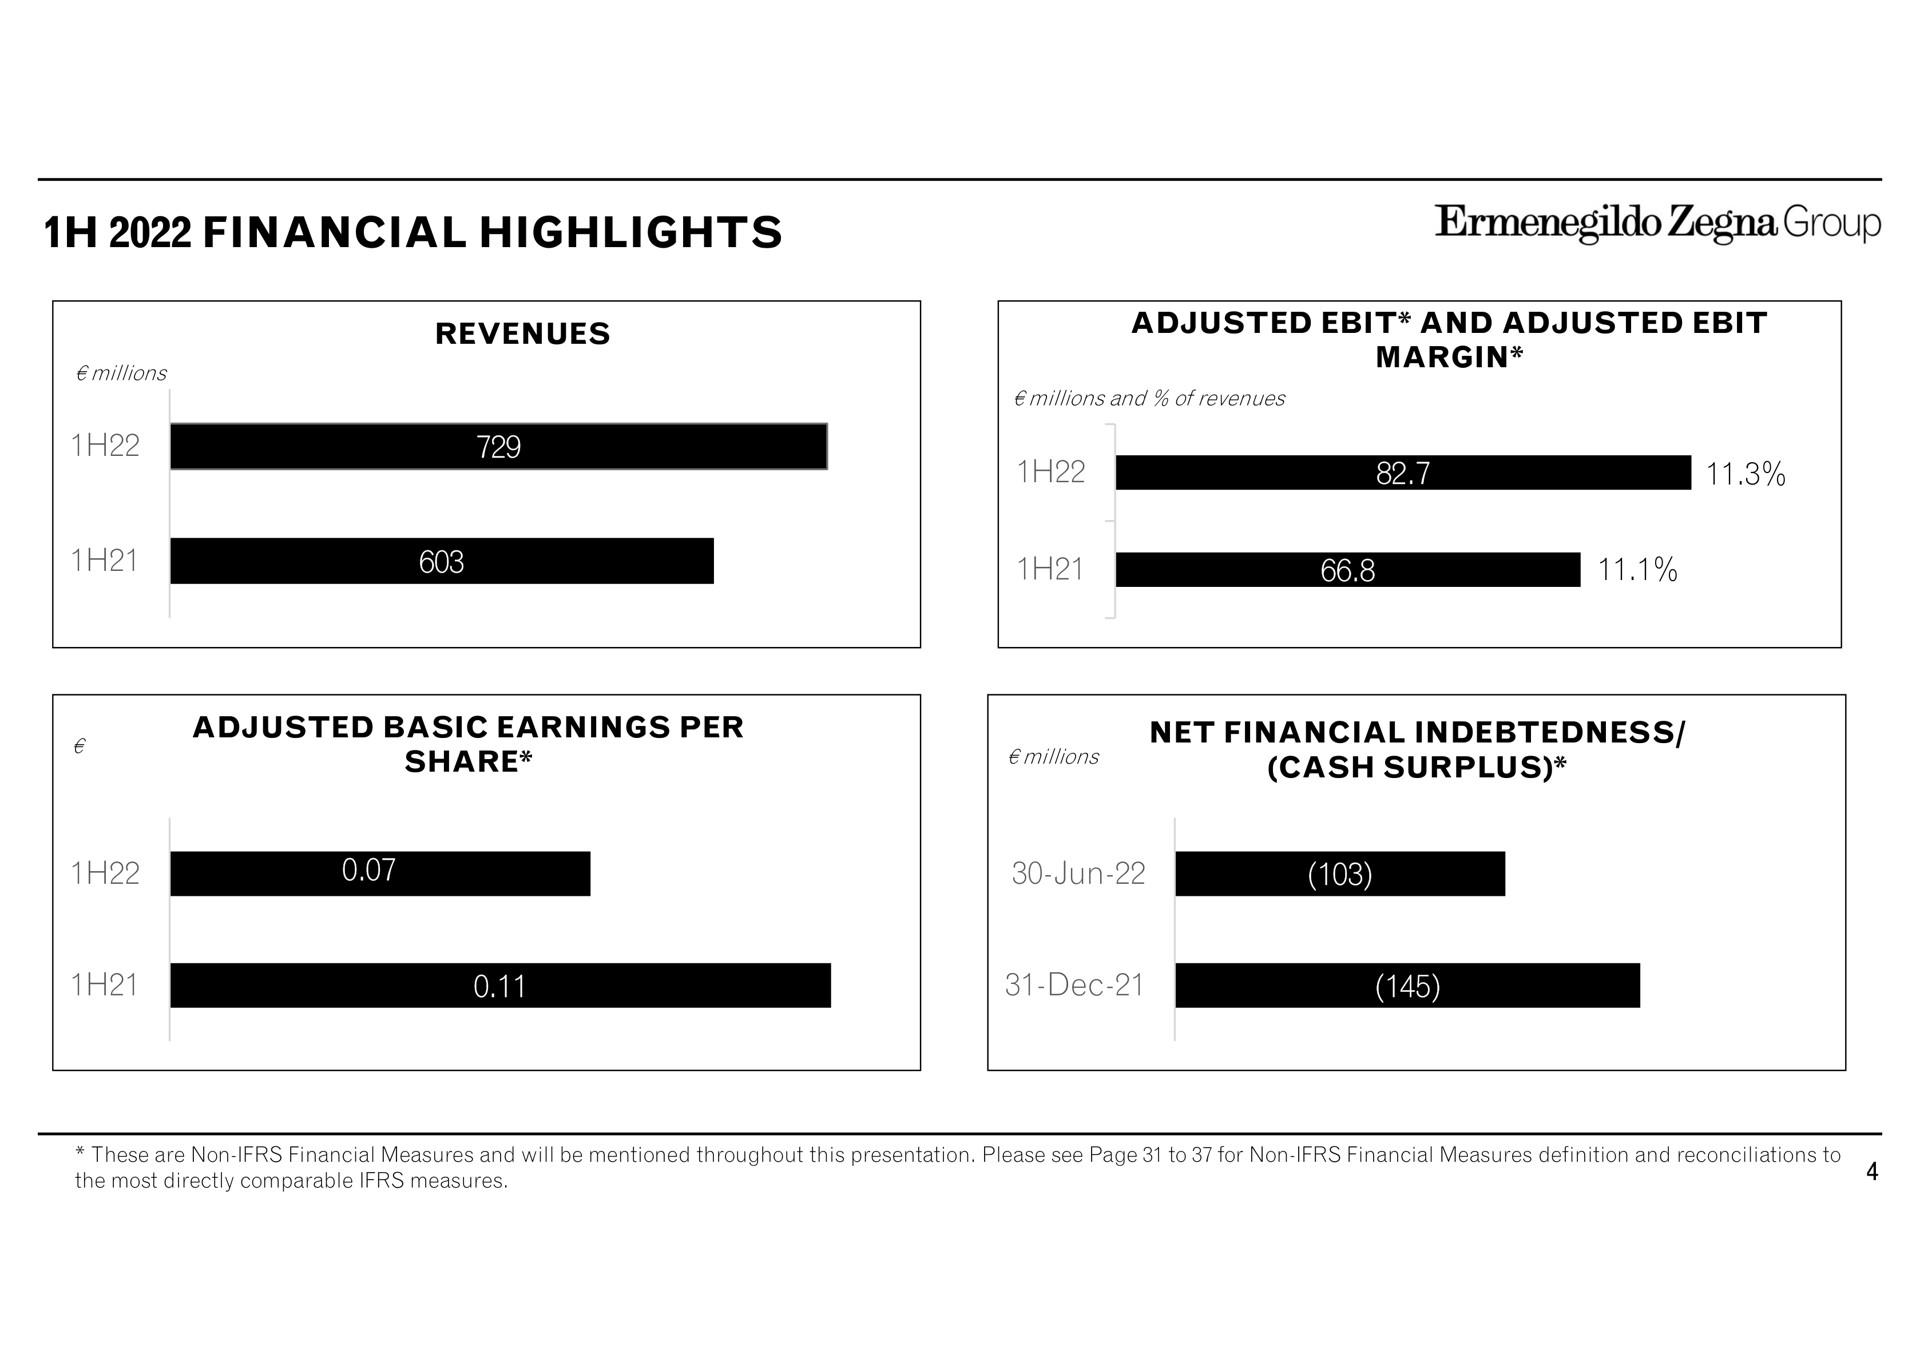 financial highlights group revenues adjusted and adjusted margin millions and of revenues a adjusted basic earnings per share net indebtedness cash surplus millions these are non measures and will be mentioned throughout this presentation please see page to for non measures definition and reconciliations to the most directly comparable measures | Zegna